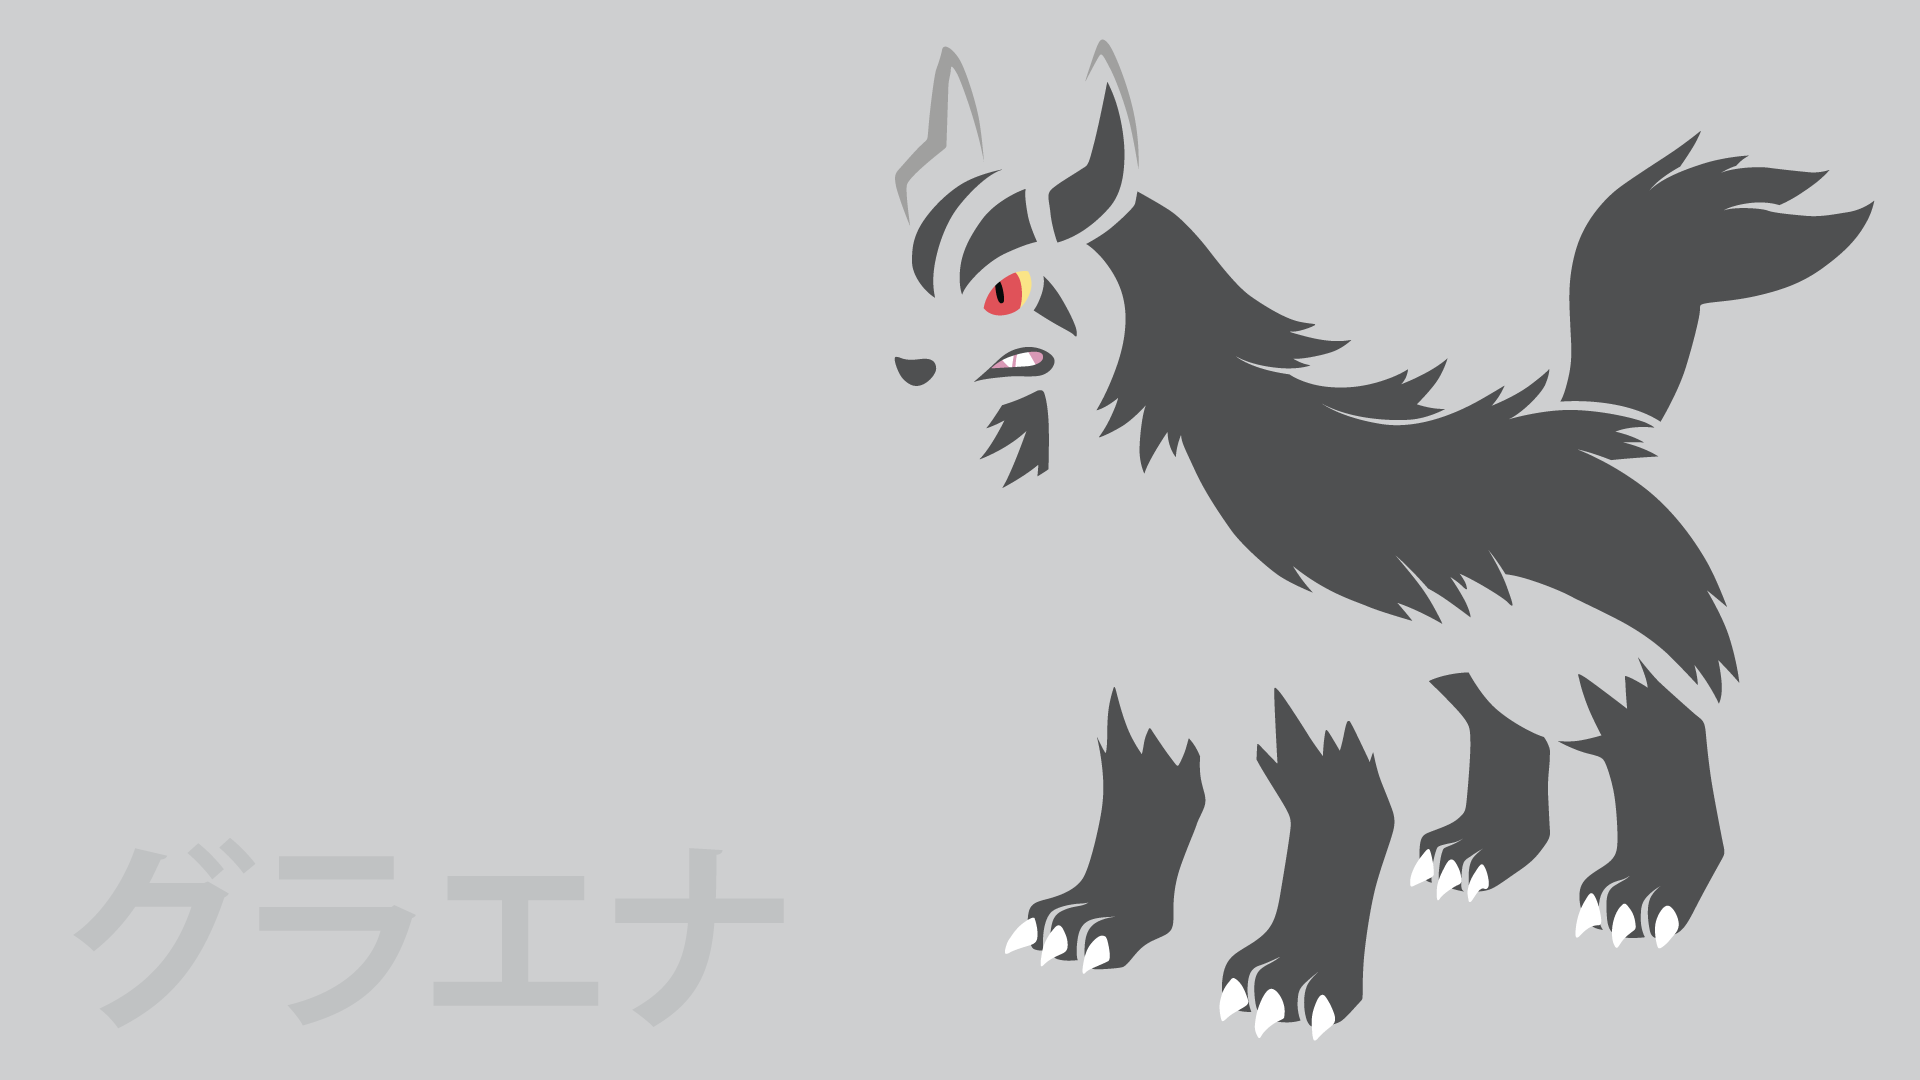 Mightyena Hd Wallpapers